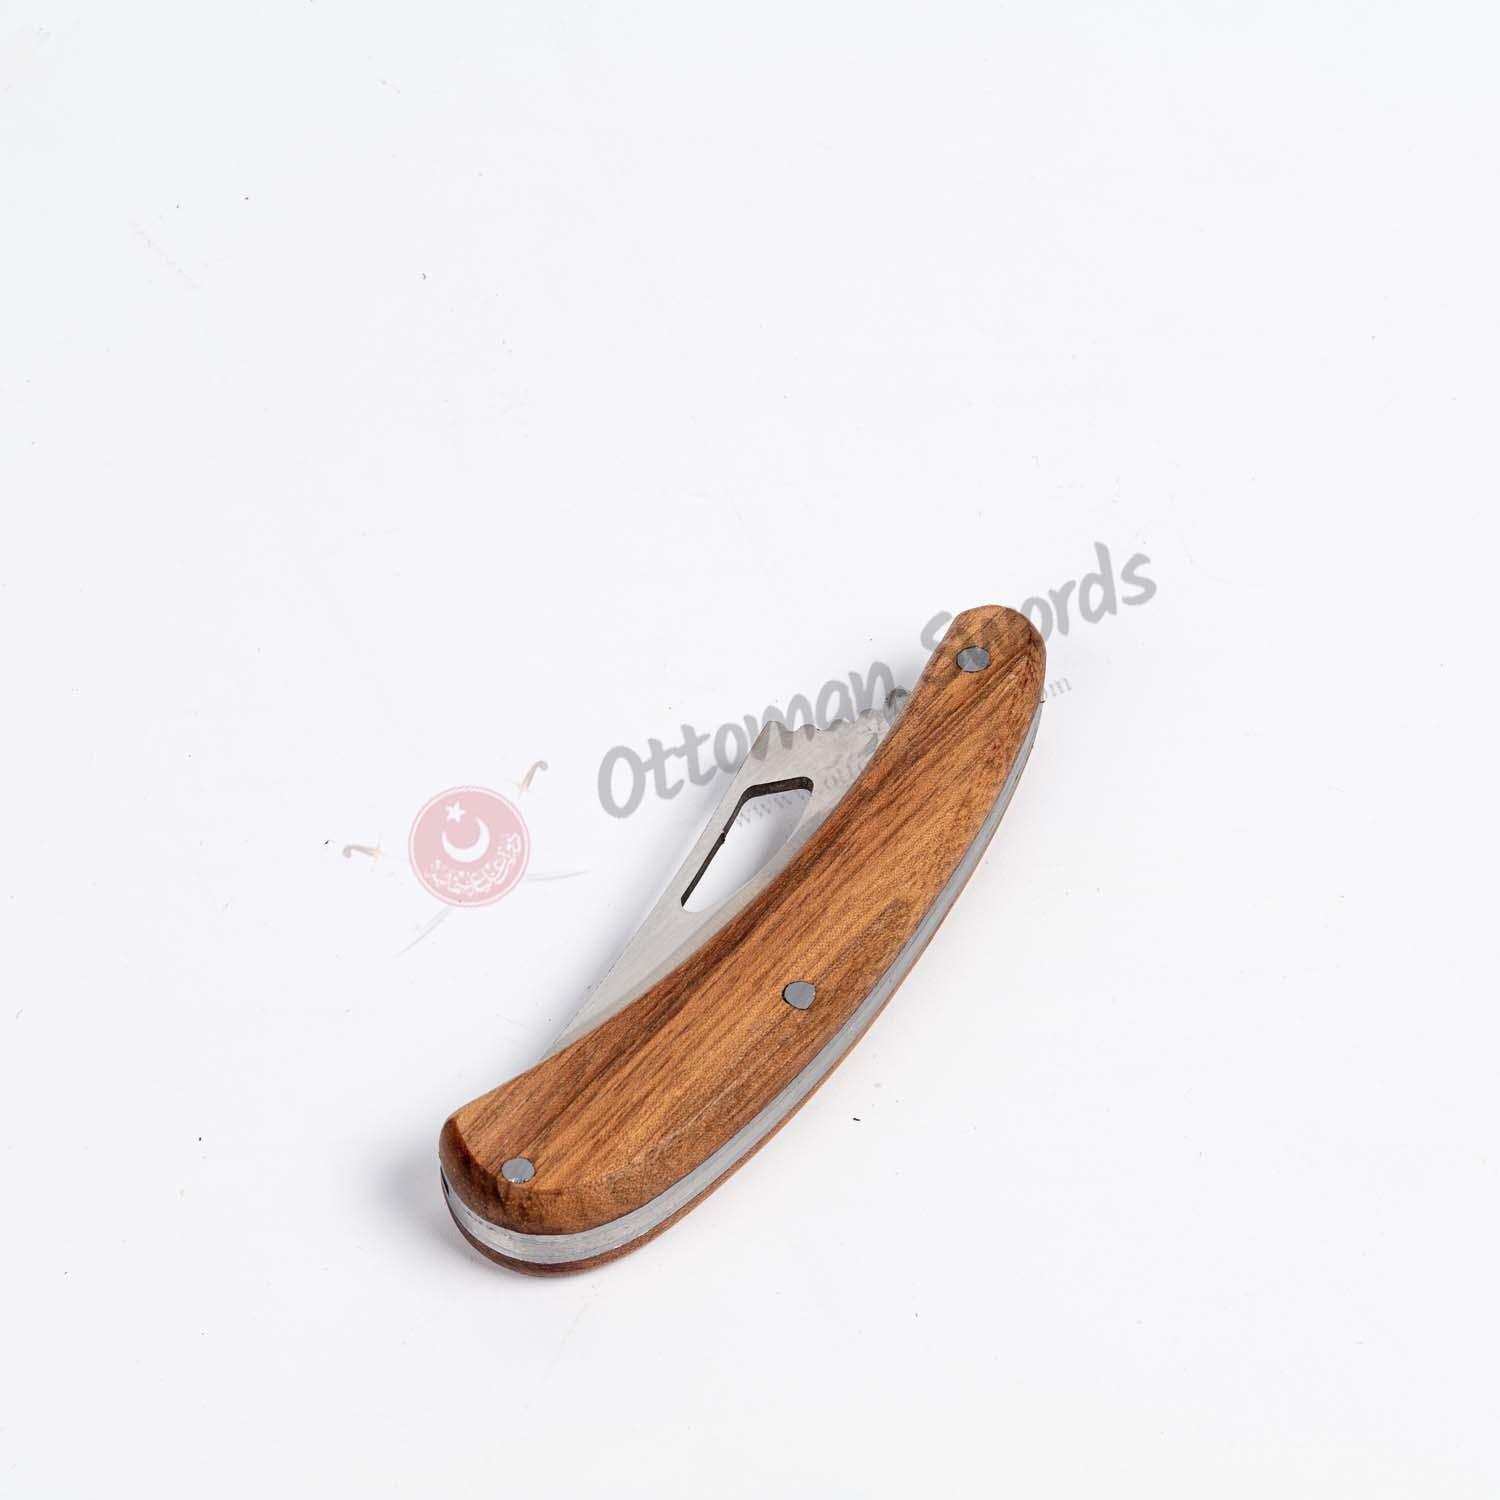 Walnut Handle Small Folding Knife 2.5 İnches Blade (2)